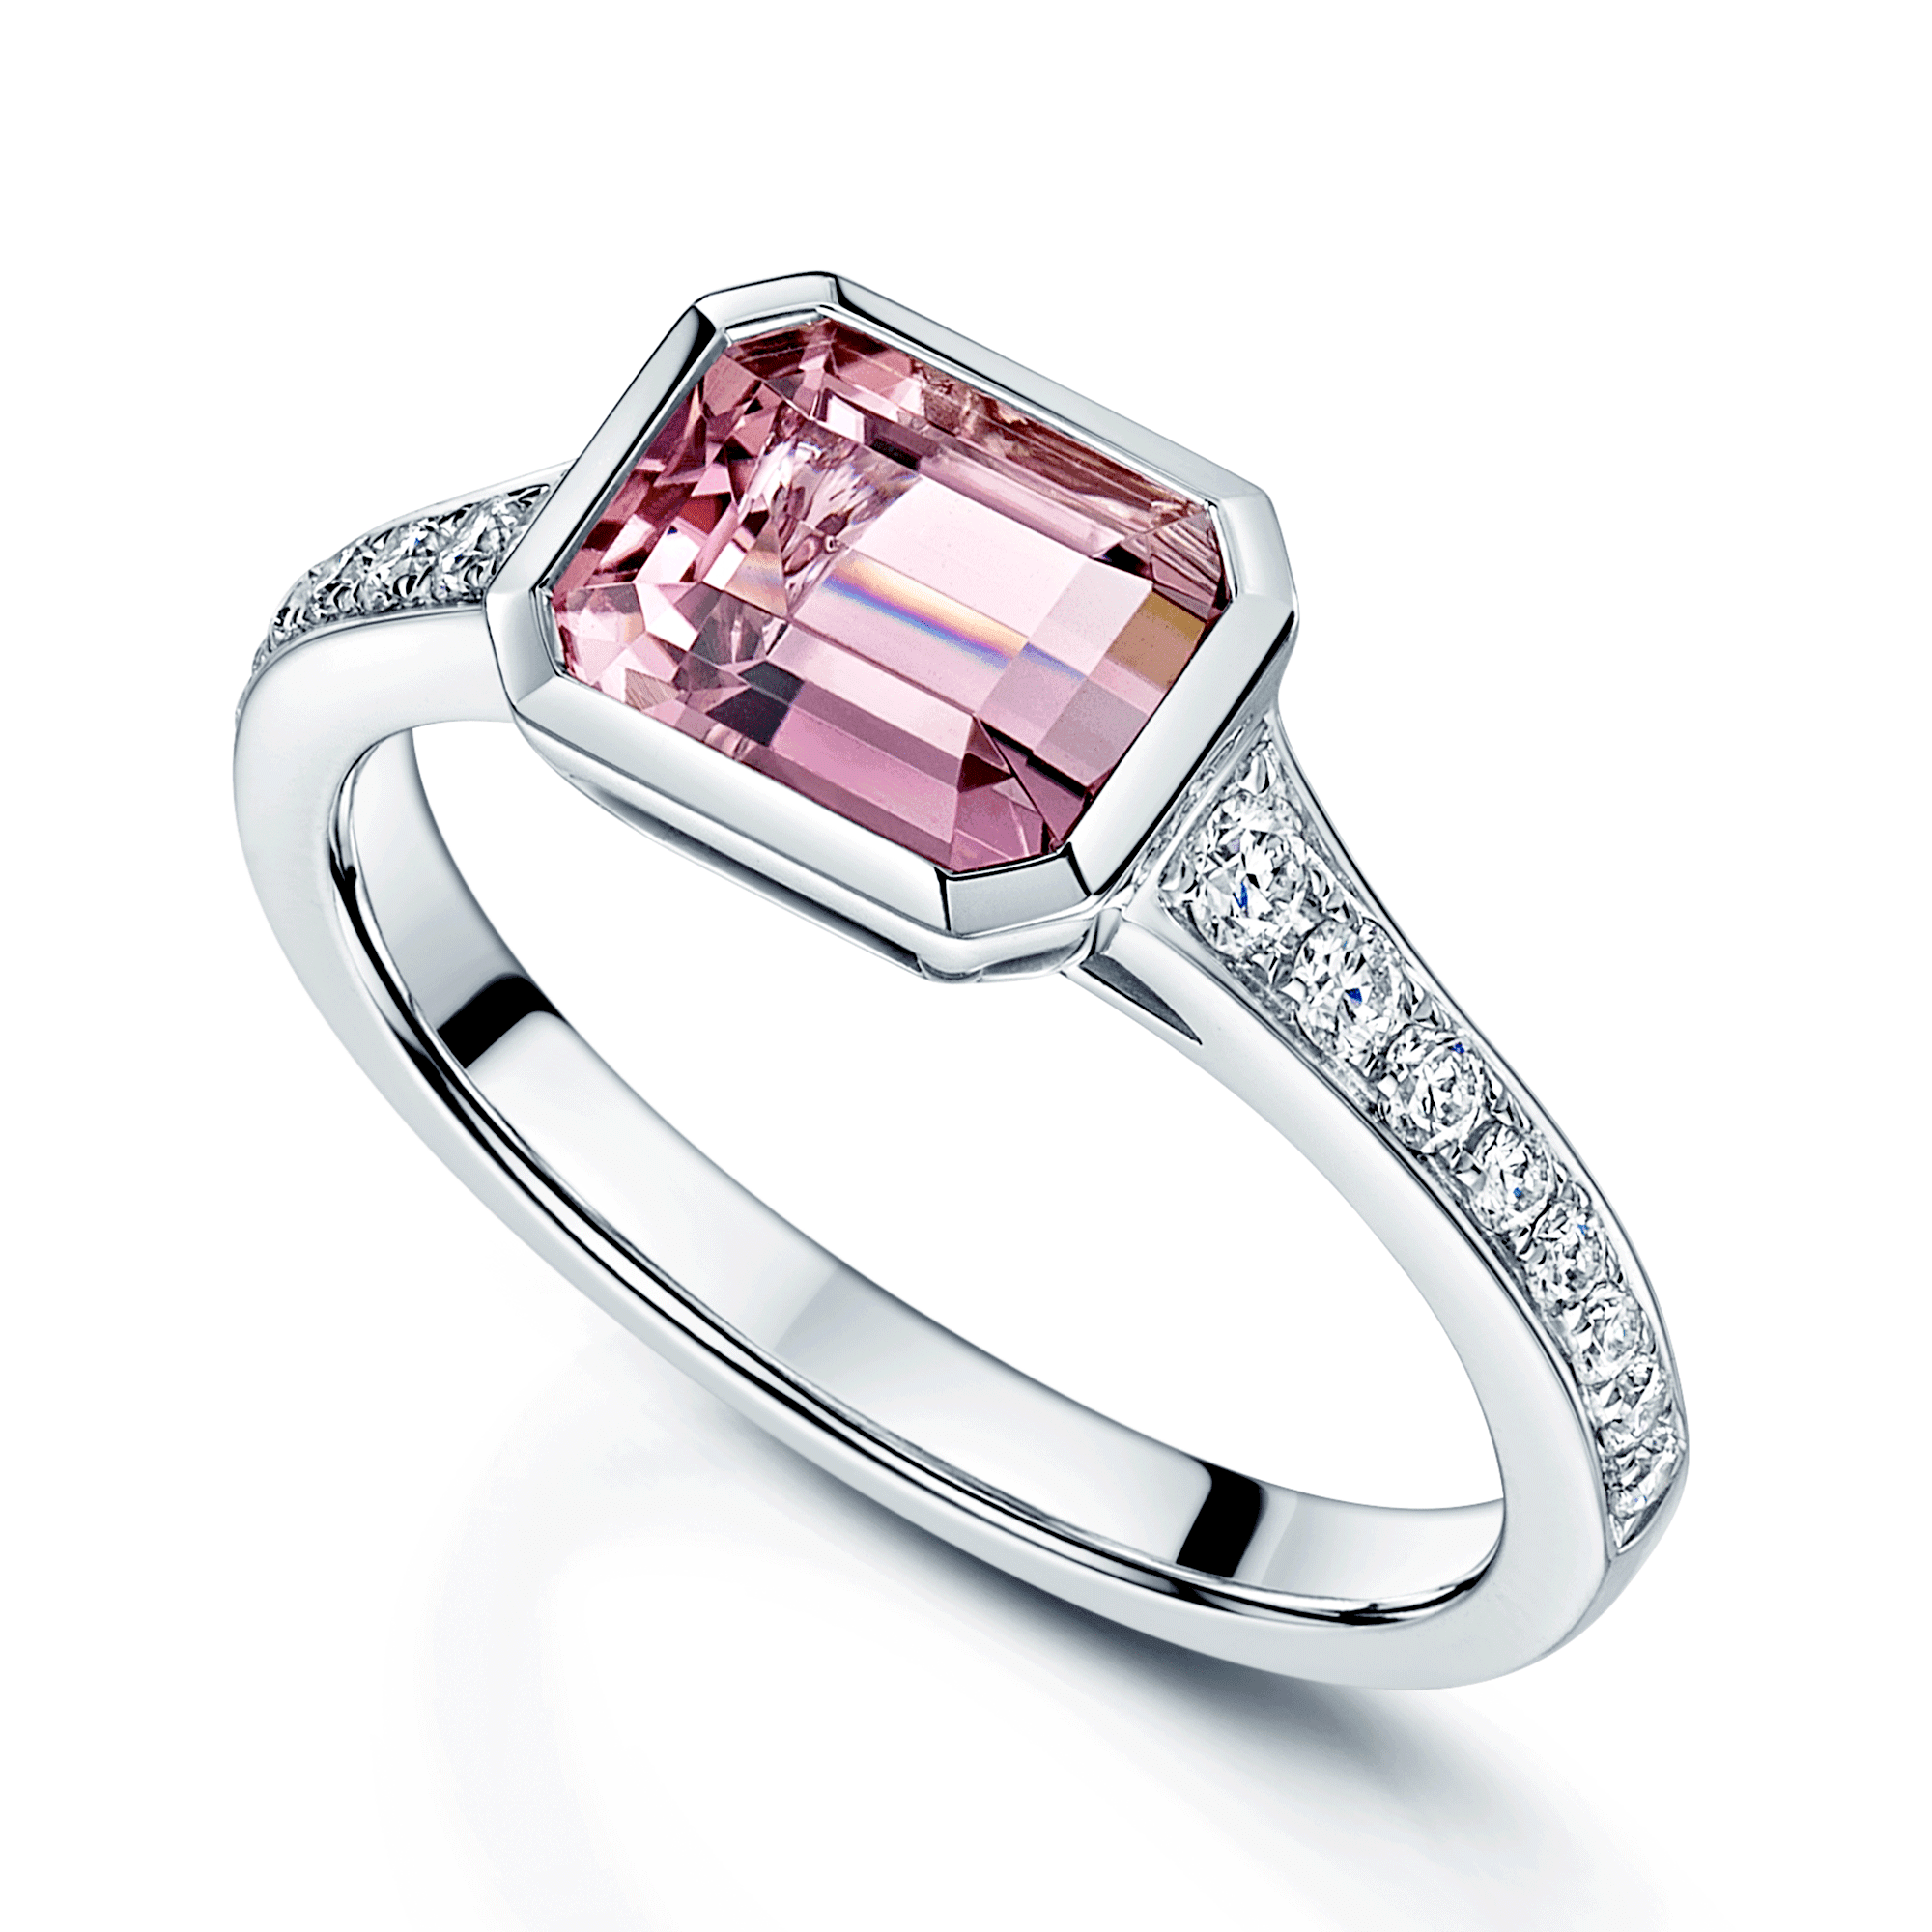 18ct White Gold Rub Over Set Emerald Cut Pink Tourmaline Ring With Diamond Set Shoulders